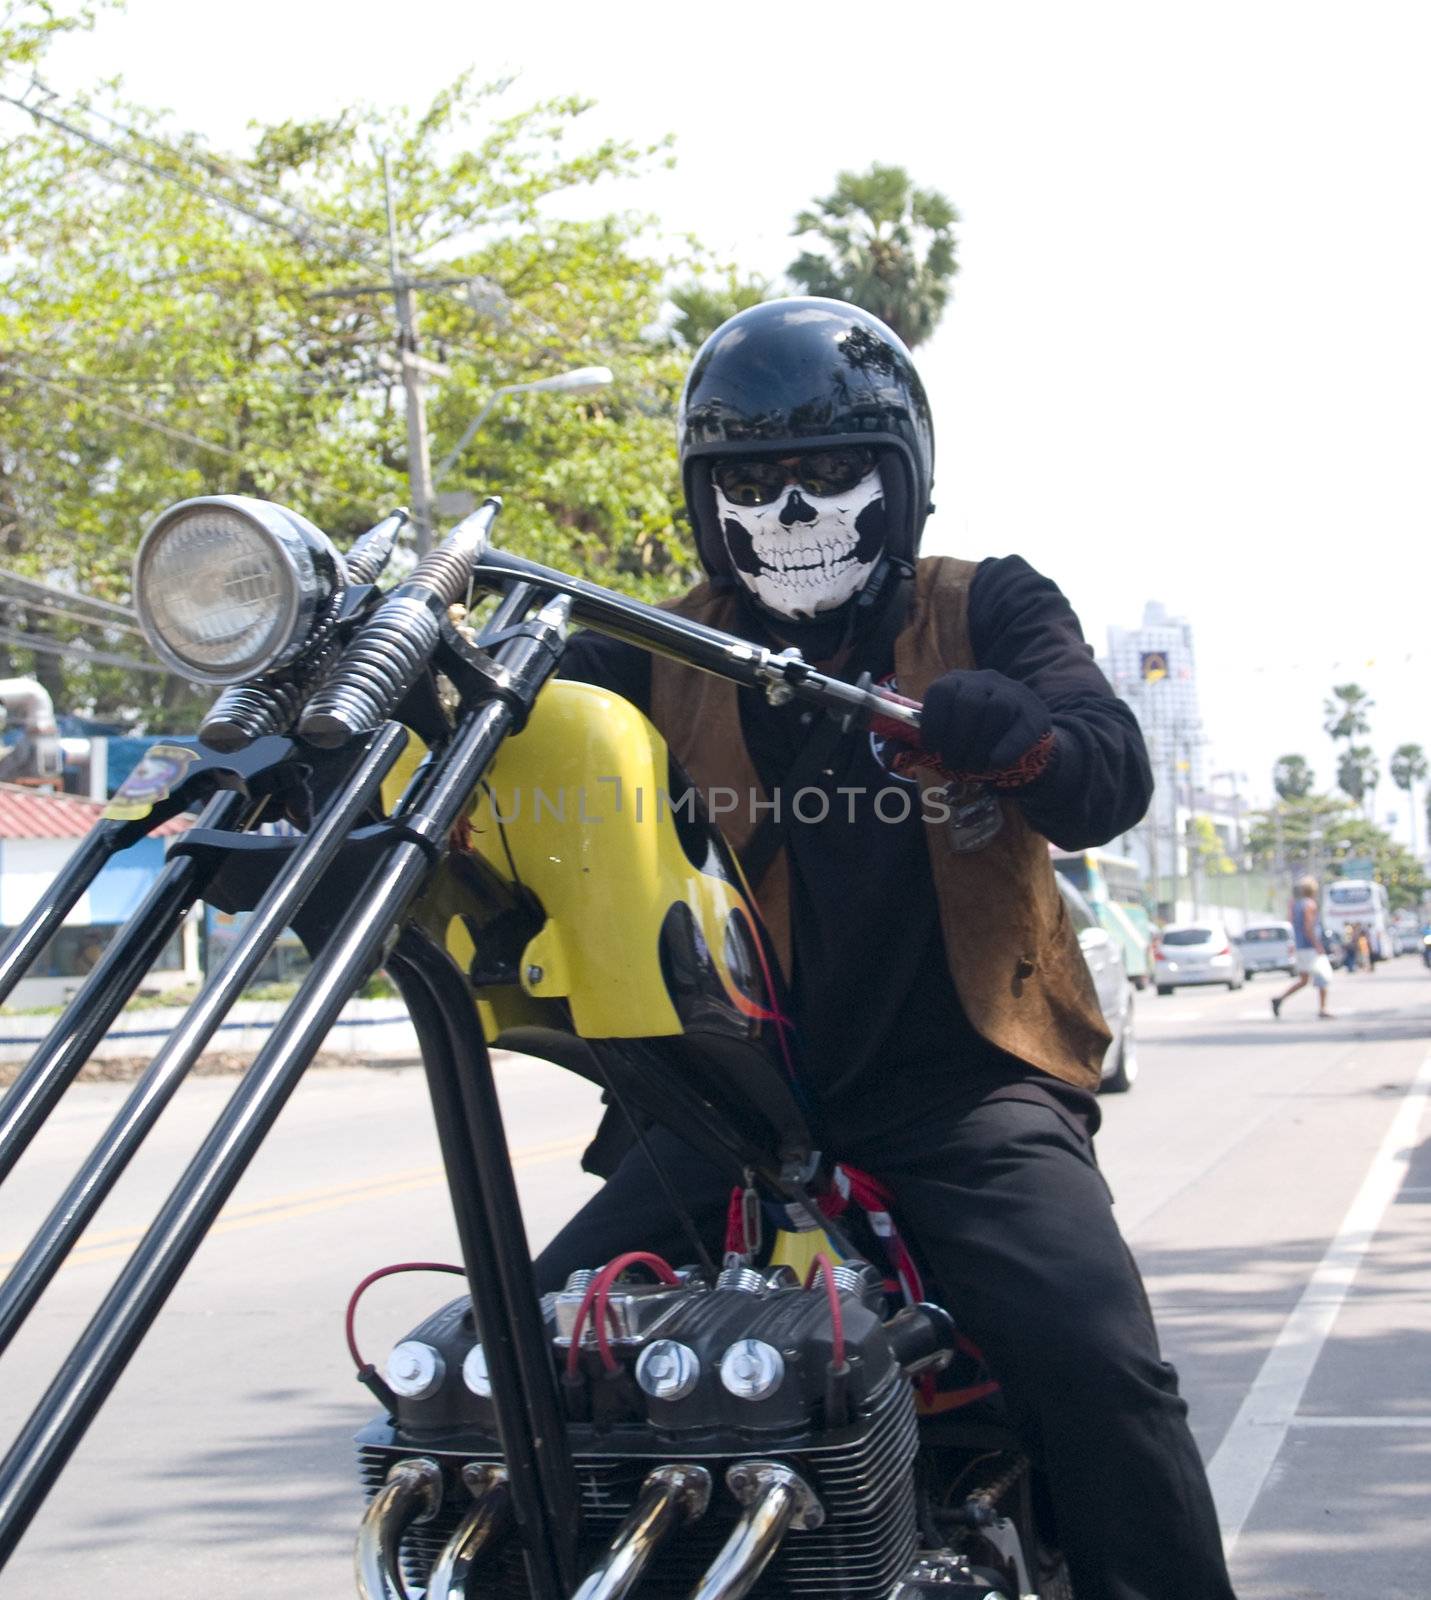 Motorcycle rider on a custom built chopper with scary mask resembling a skull